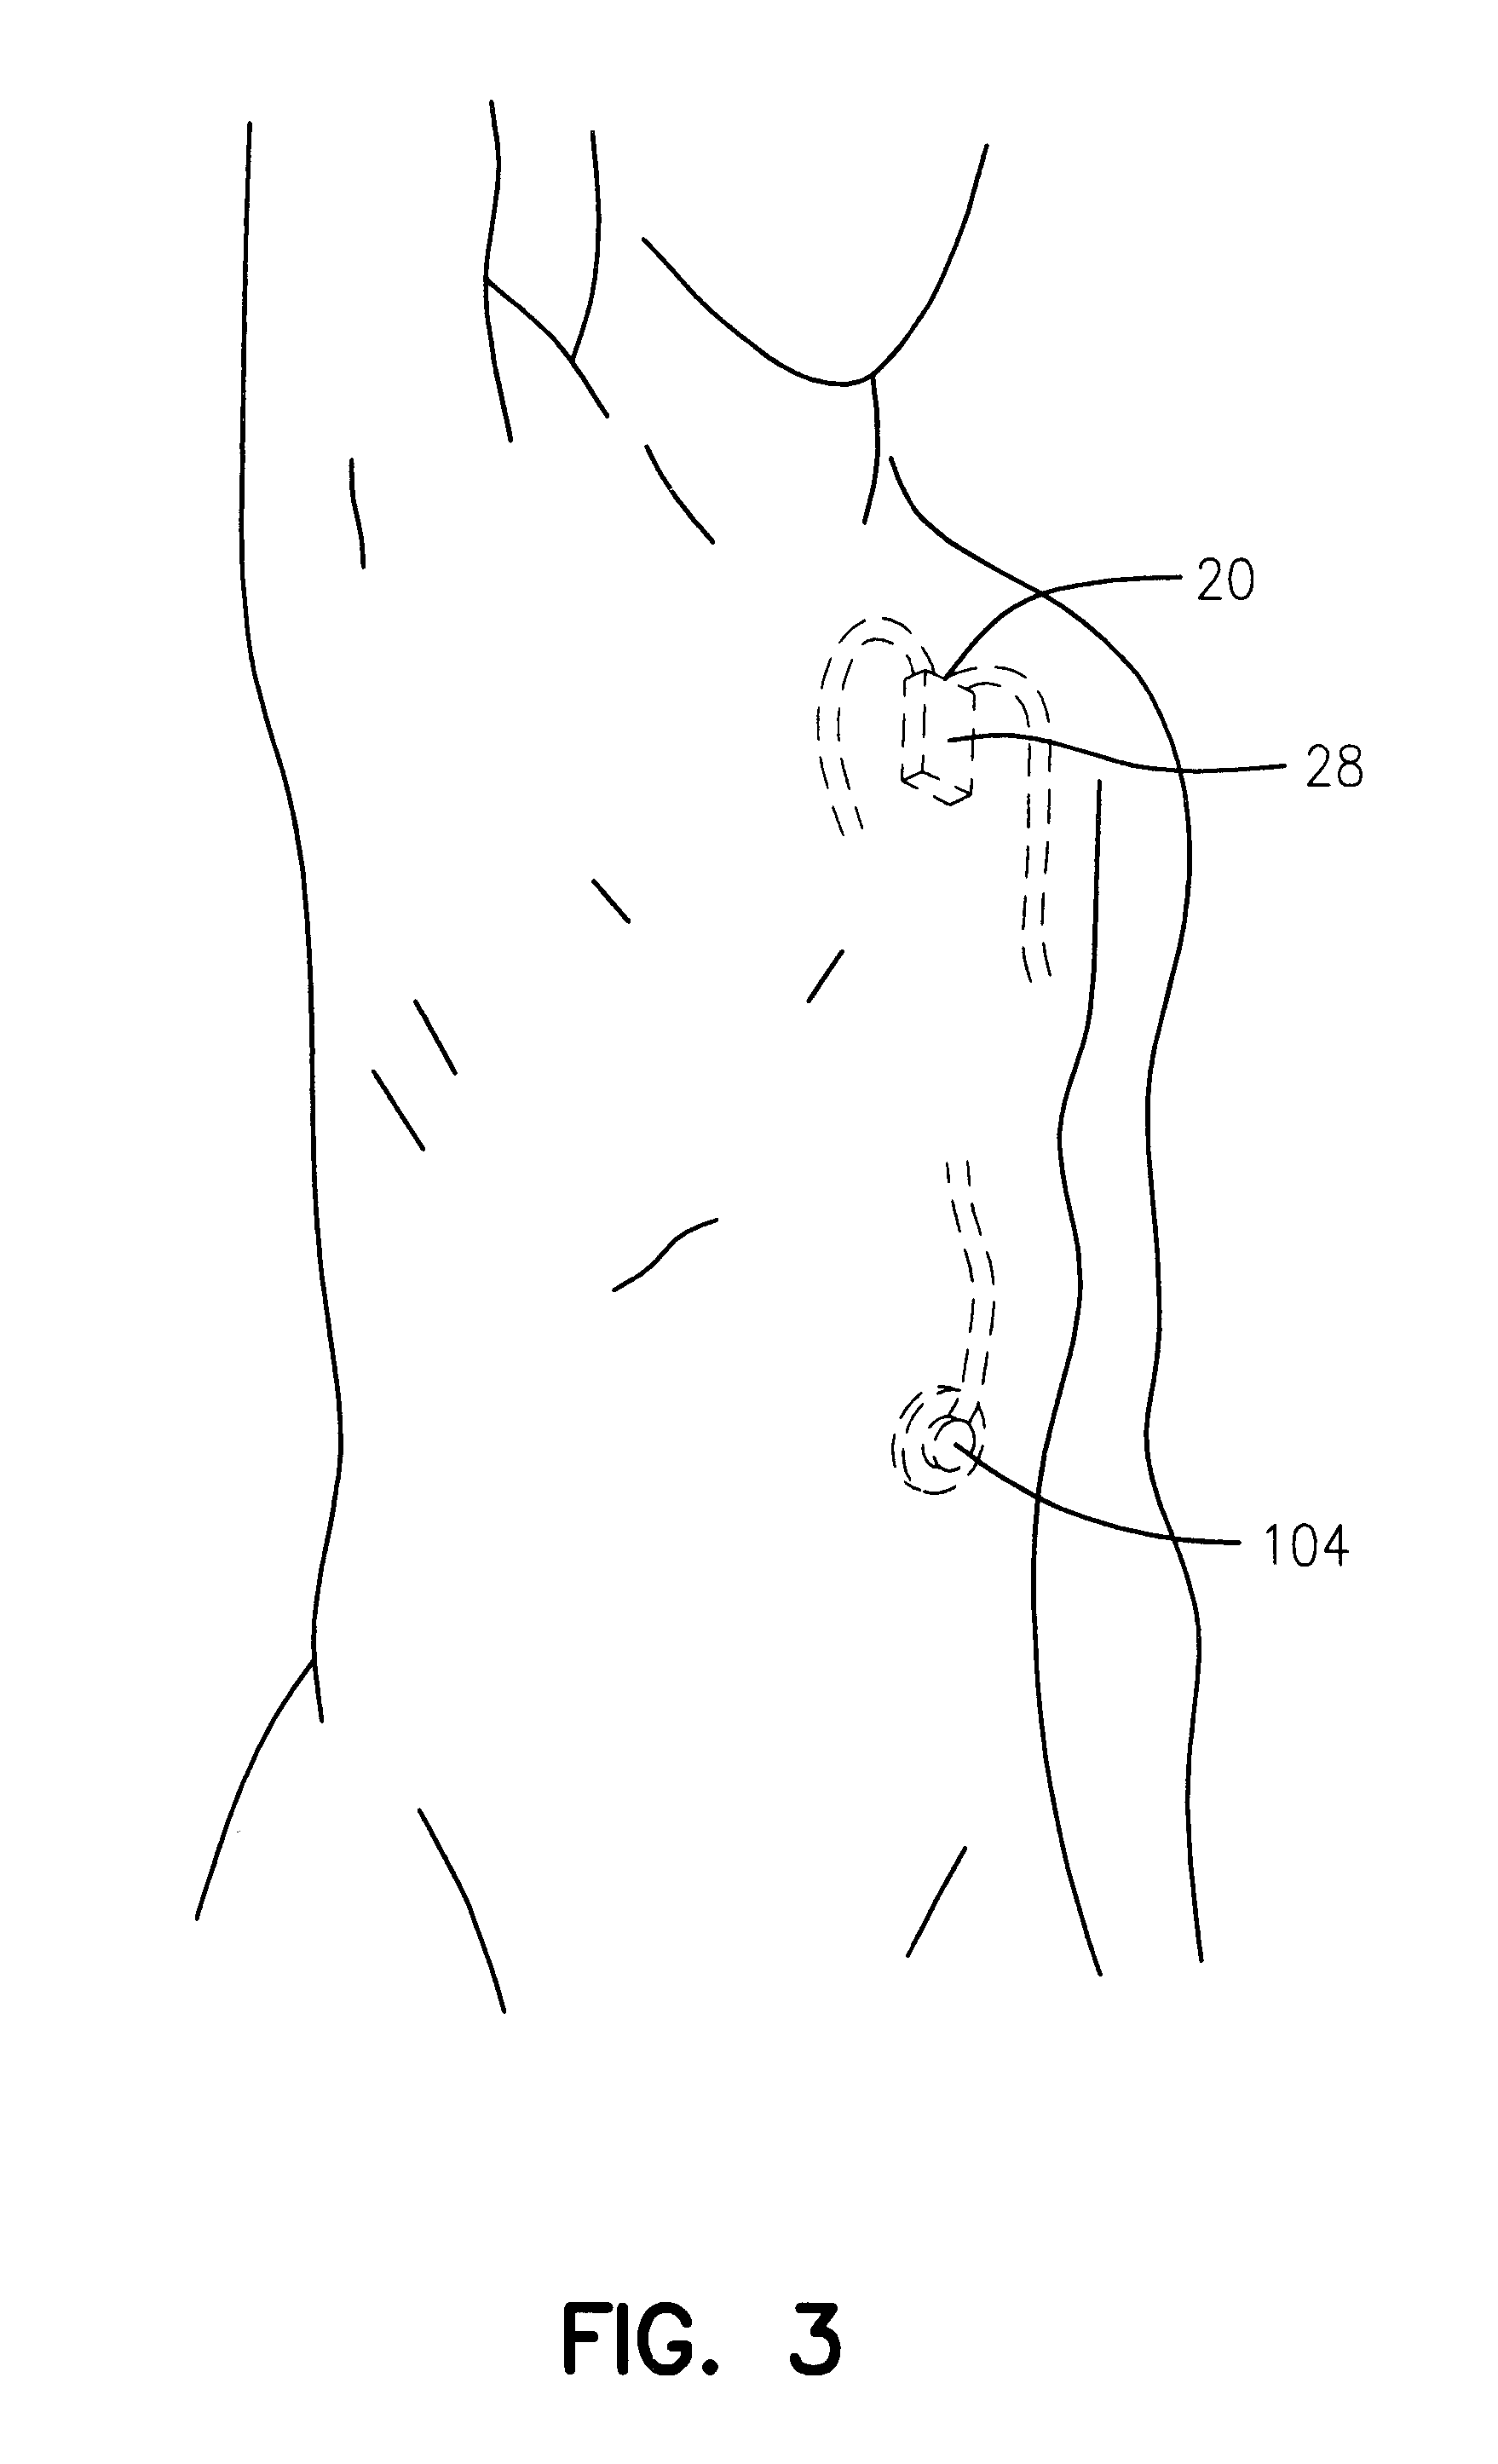 Implantable fluid delivery device for basal and bolus delivery of medicinal fluids